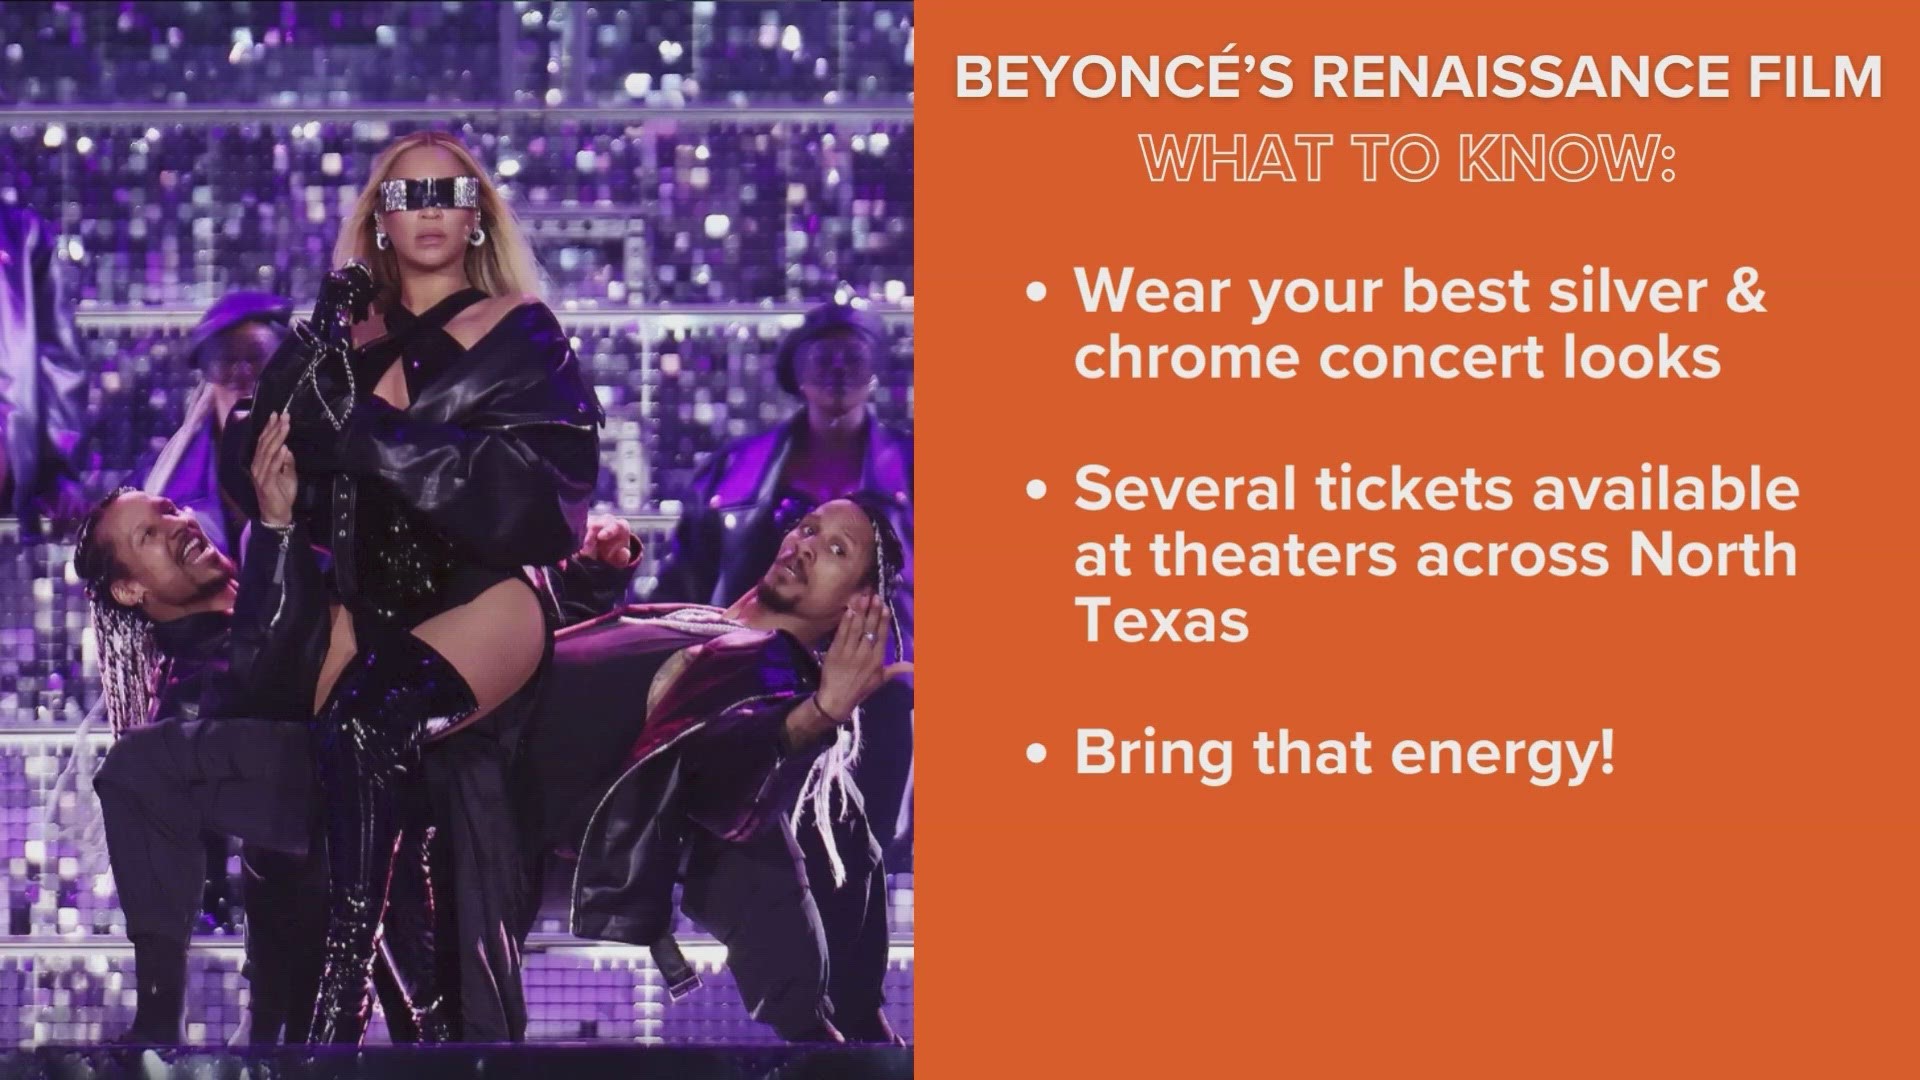 There are no Bey-approved rules for the film showings, but here are some things to keep in mind.